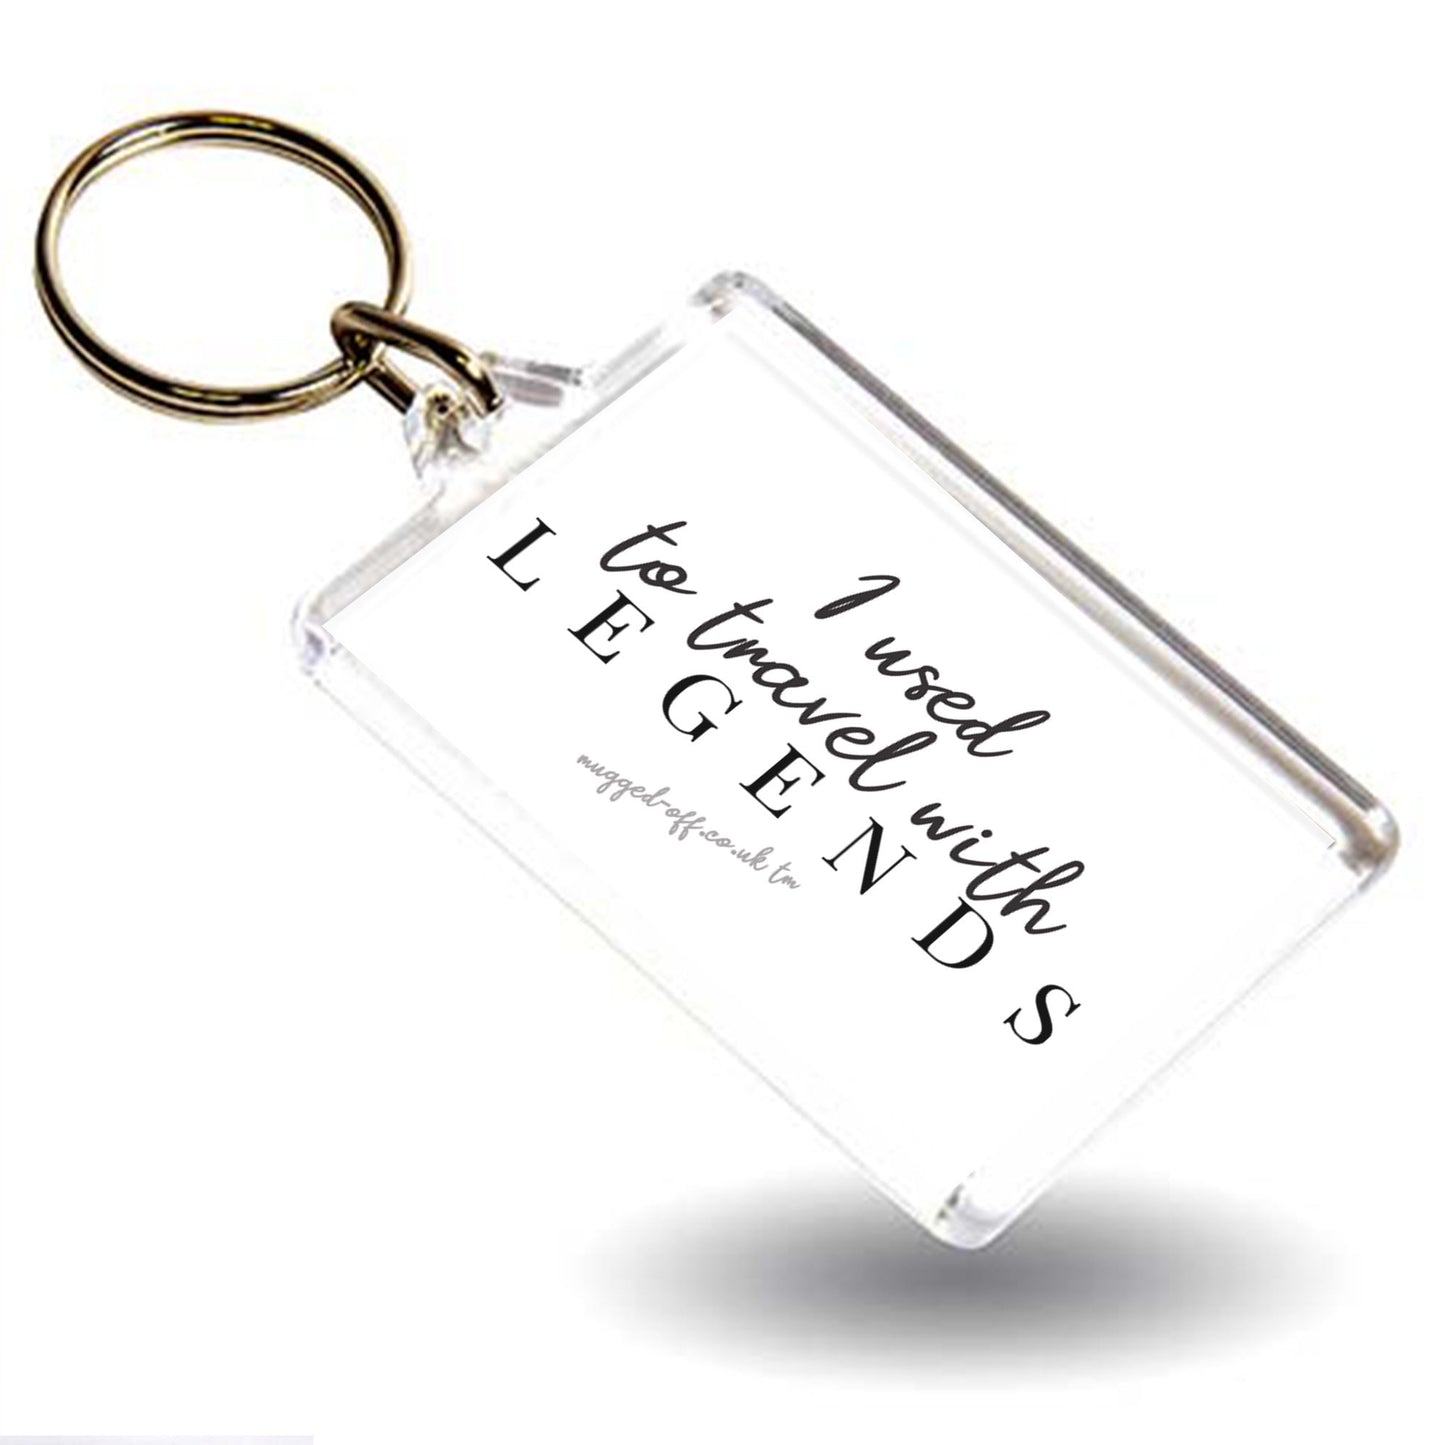 Gap Year travelling gift Keyring I used to travel with Legends